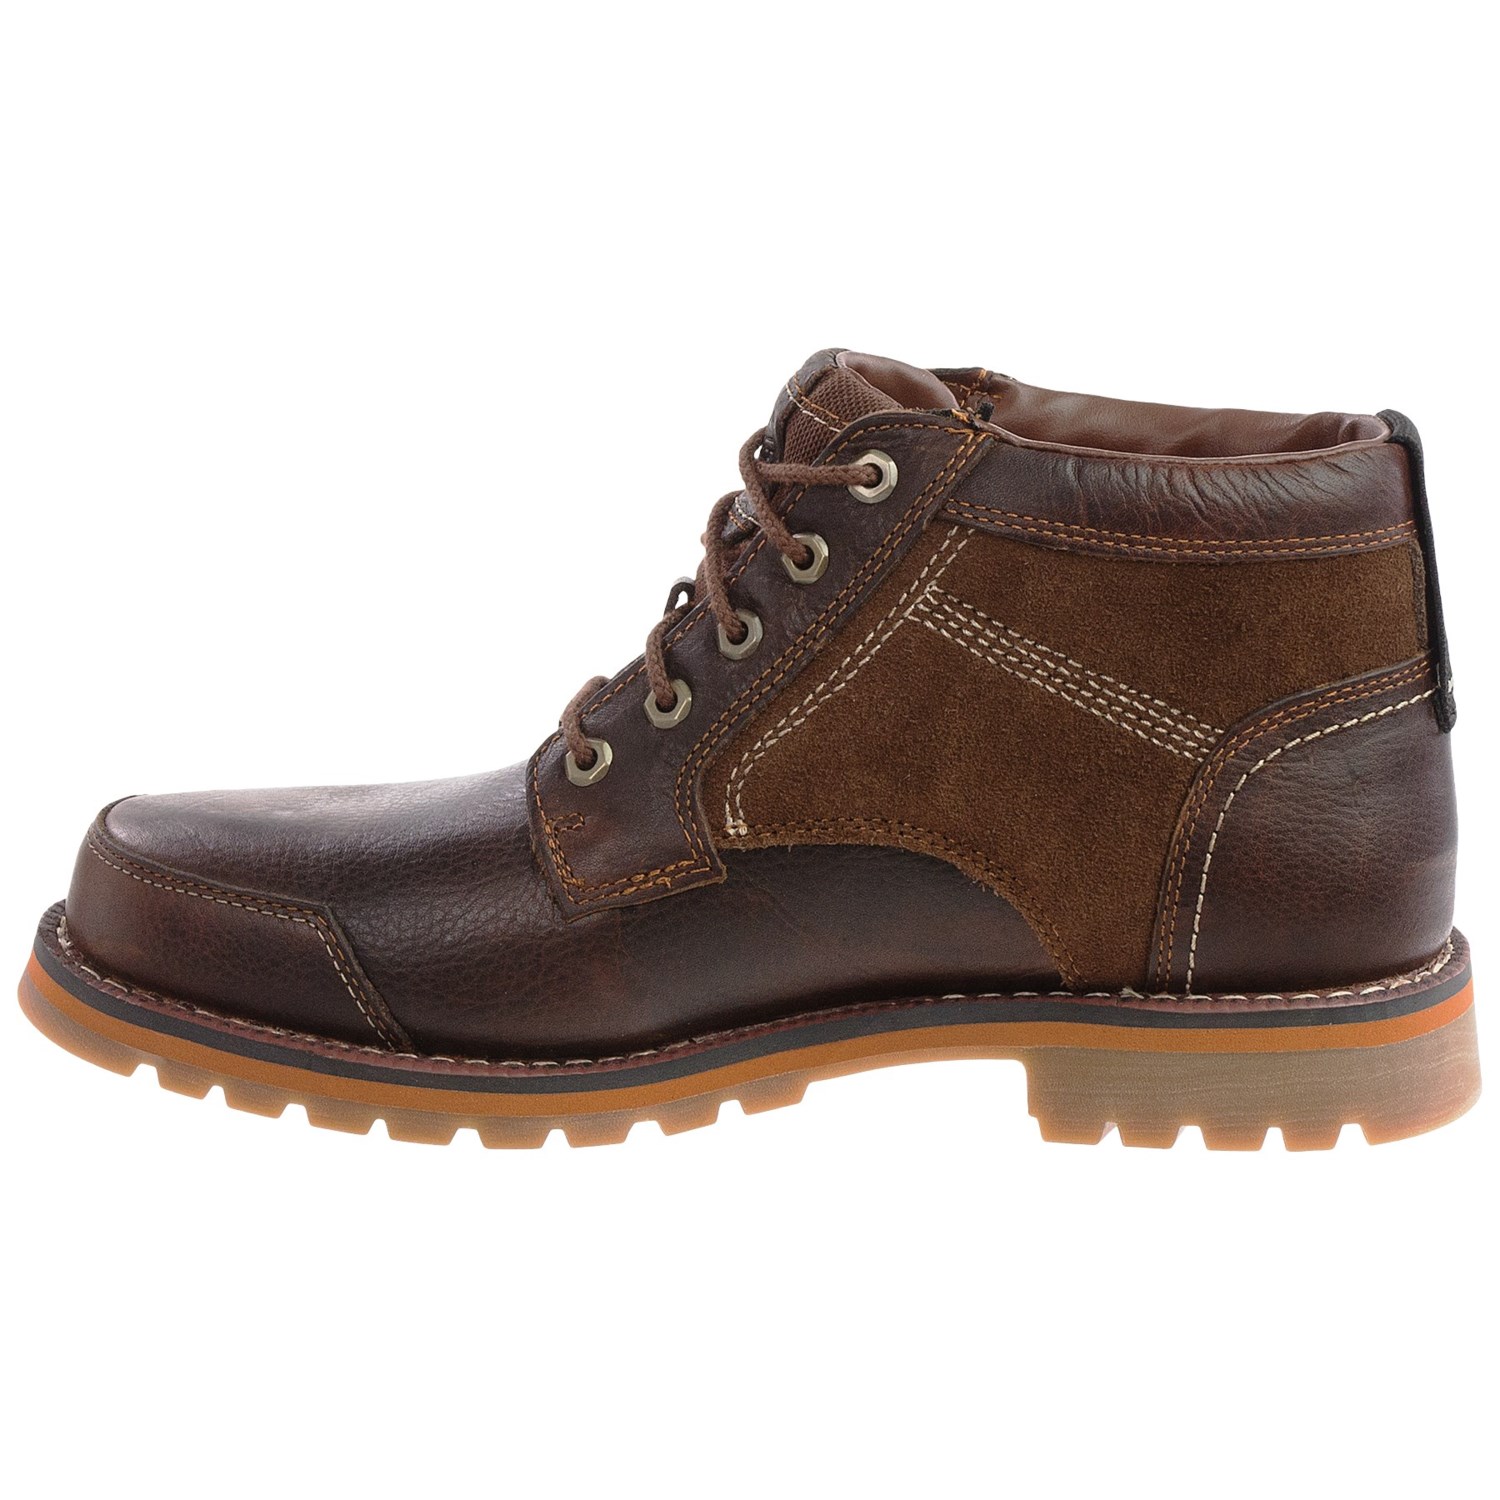 Timberland Earthkeepers Larchmont Chukka Boots (For Men) 9917U - Save 35%